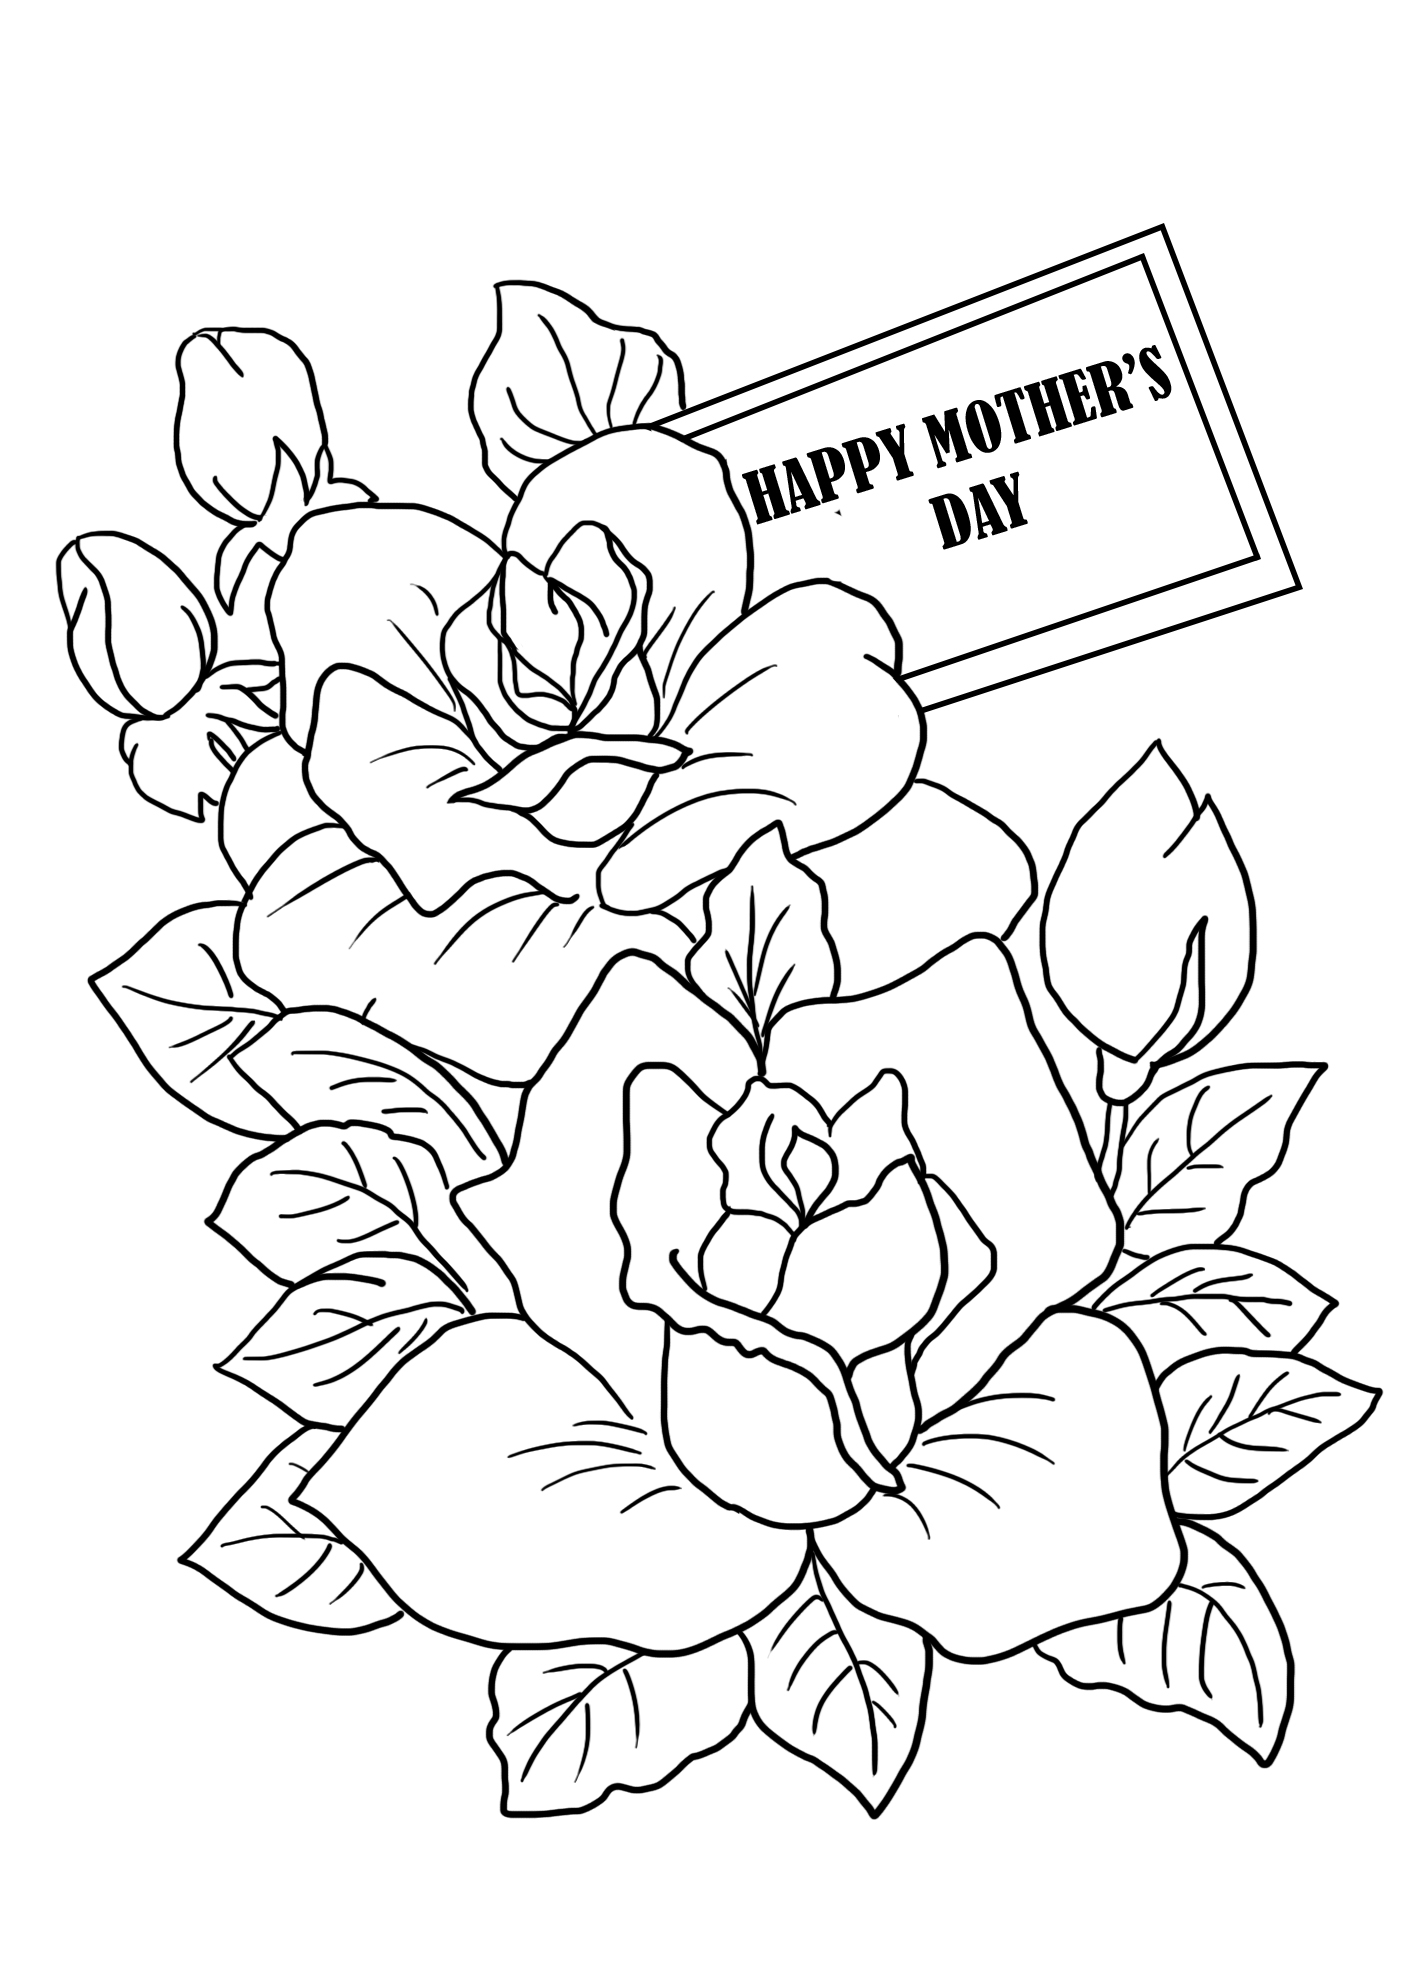 mother-s-day-coloring-pages